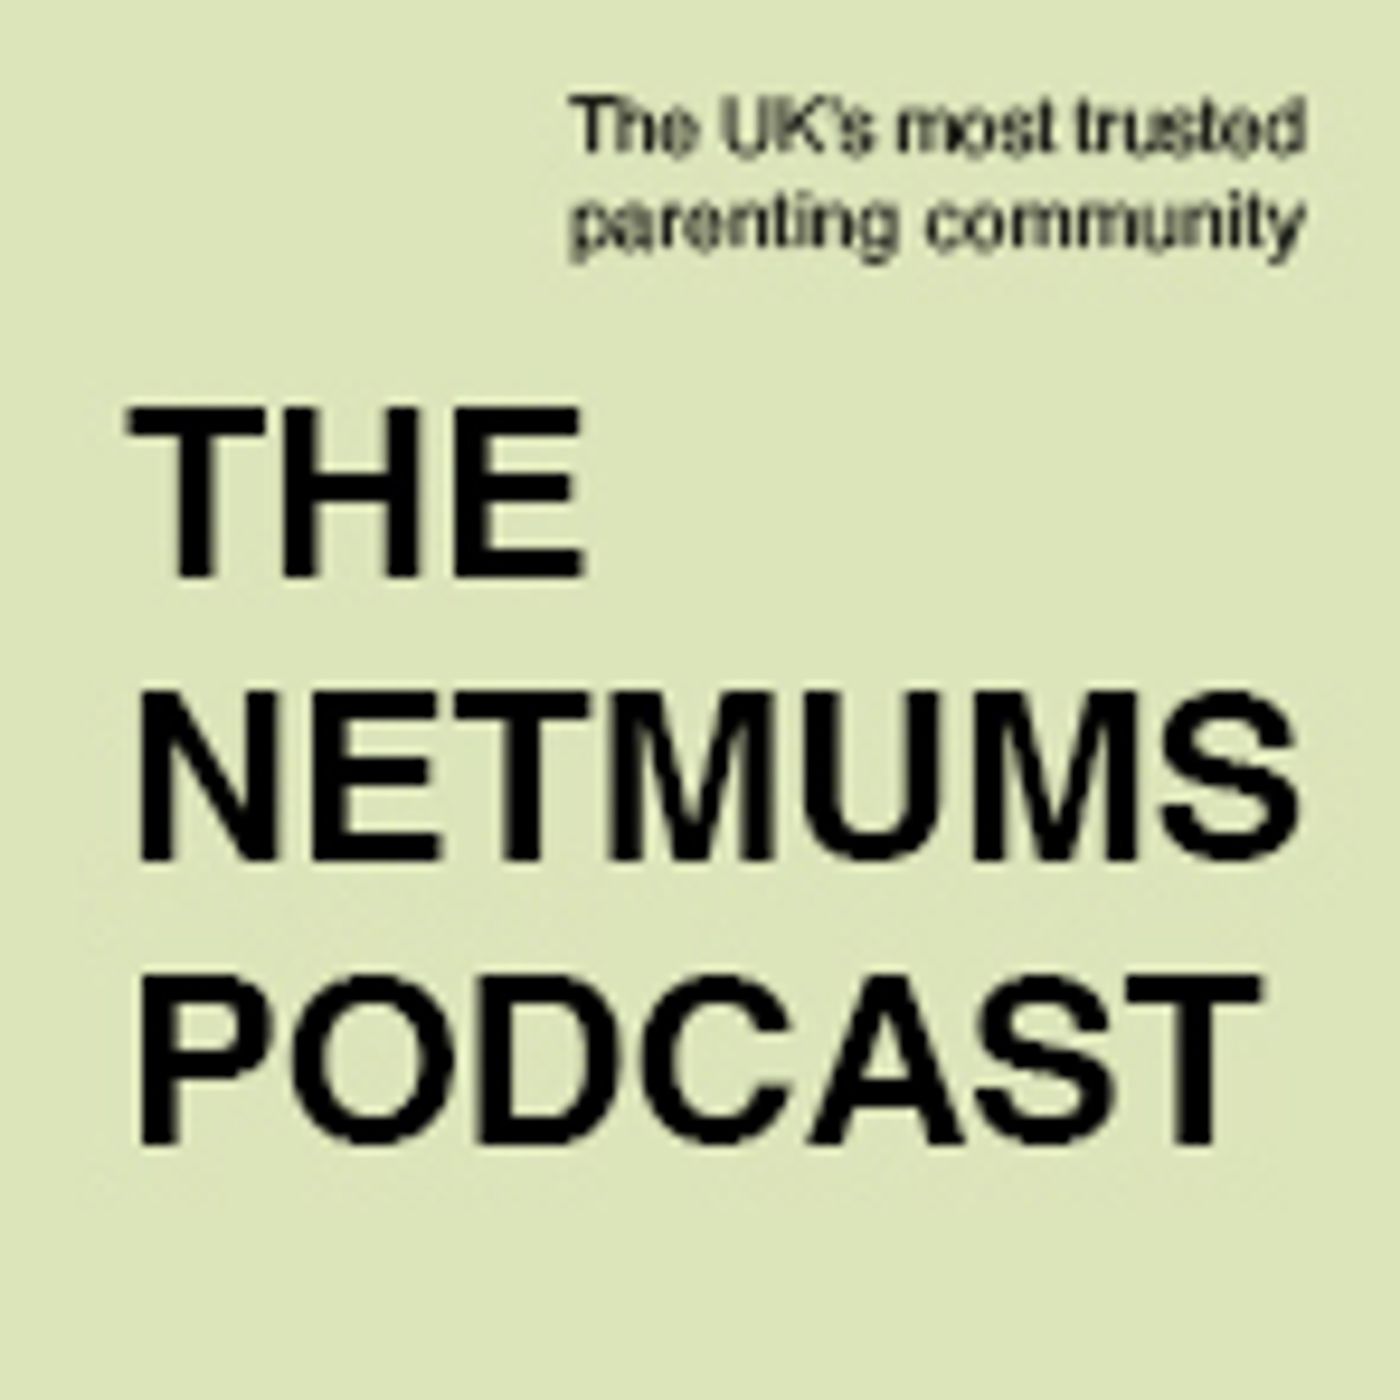 The Netmums Podcast podcast show image